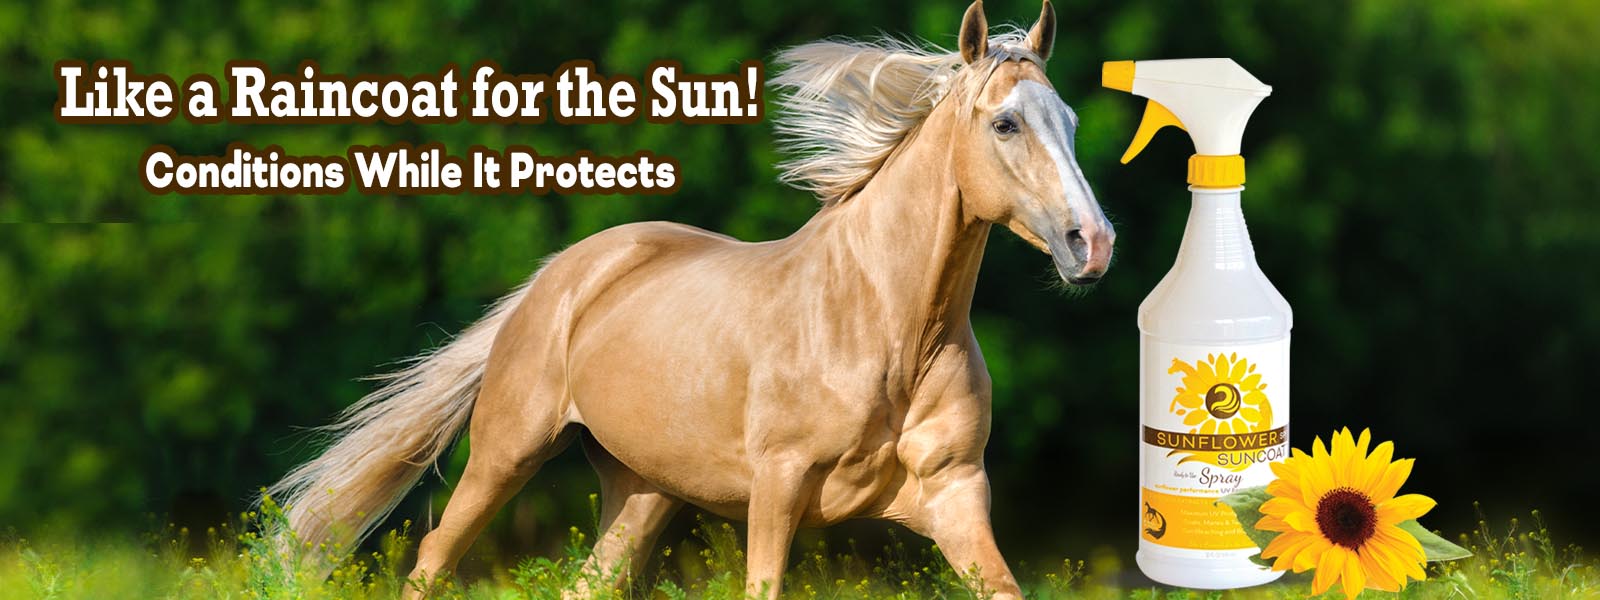 Horse Hair Care & Horse Products - Horse Grooming Solutions